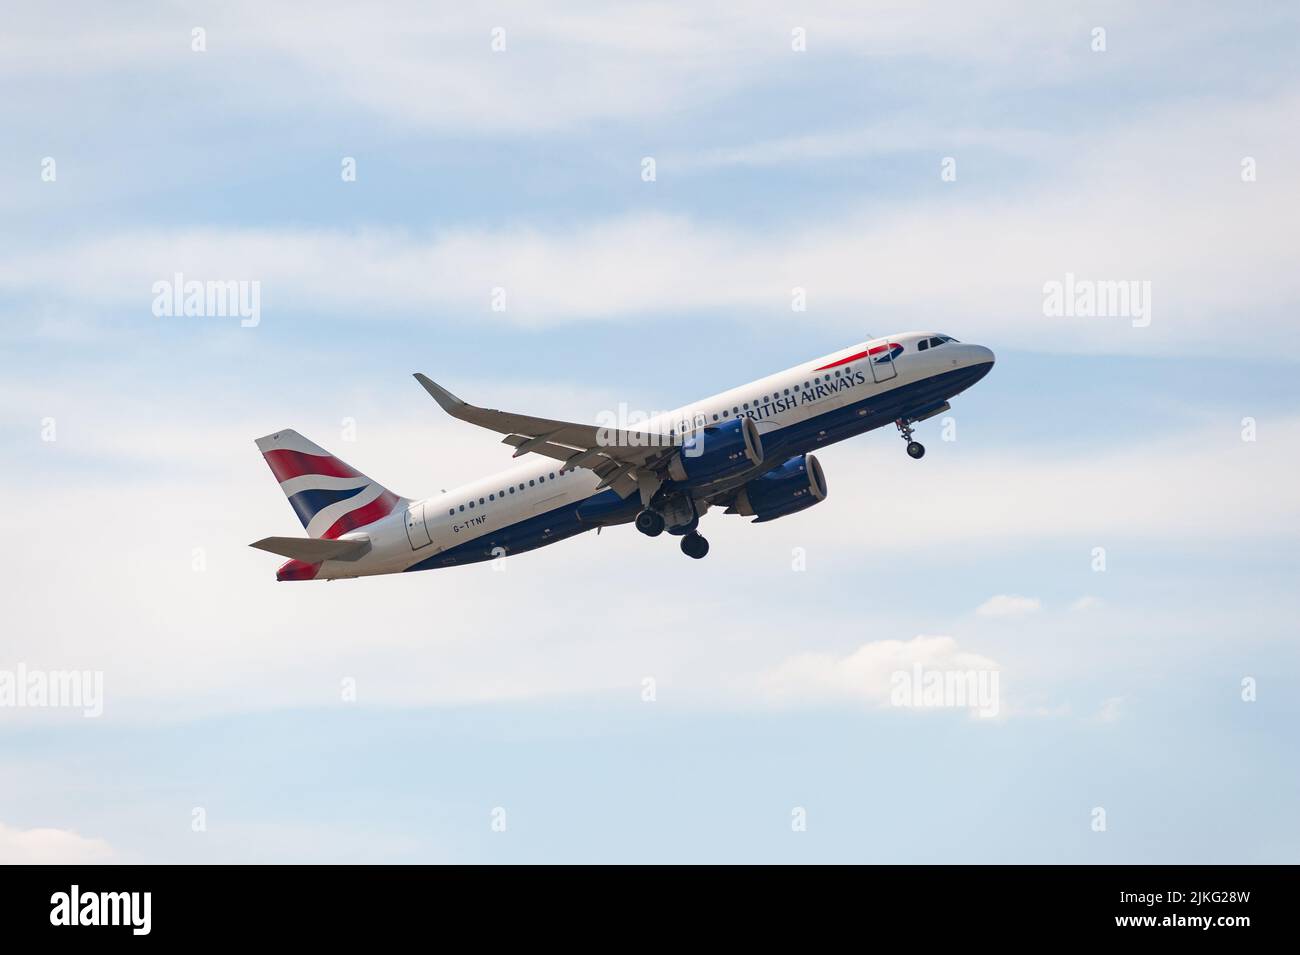 03.06.2022, Germany, Berlin, Berlin - Europe - A British Airways Airbus A320 Neo passenger aircraft with registration G-TTNF taking off from Berlin Br Stock Photo